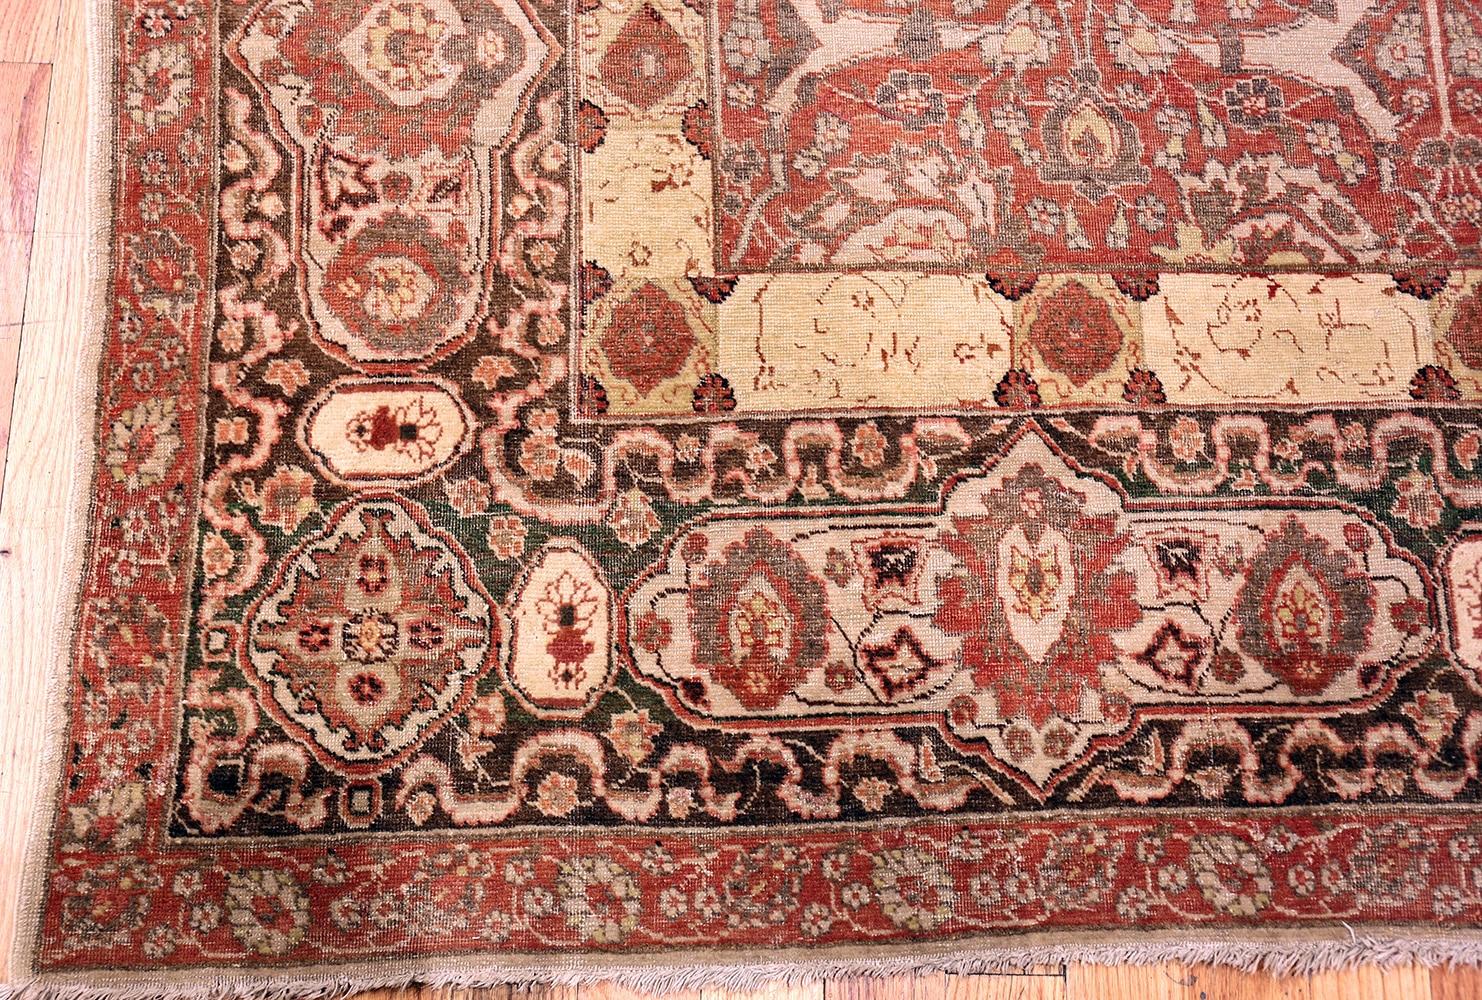 A beautiful and finely woven large room size rust color antique Persian Tabriz rug, country of origin / rug type: Persia, circa date: circa 1900. Size: 10 ft 6 in x 14 ft 4 in (3.2 m x 4.37 m). 

